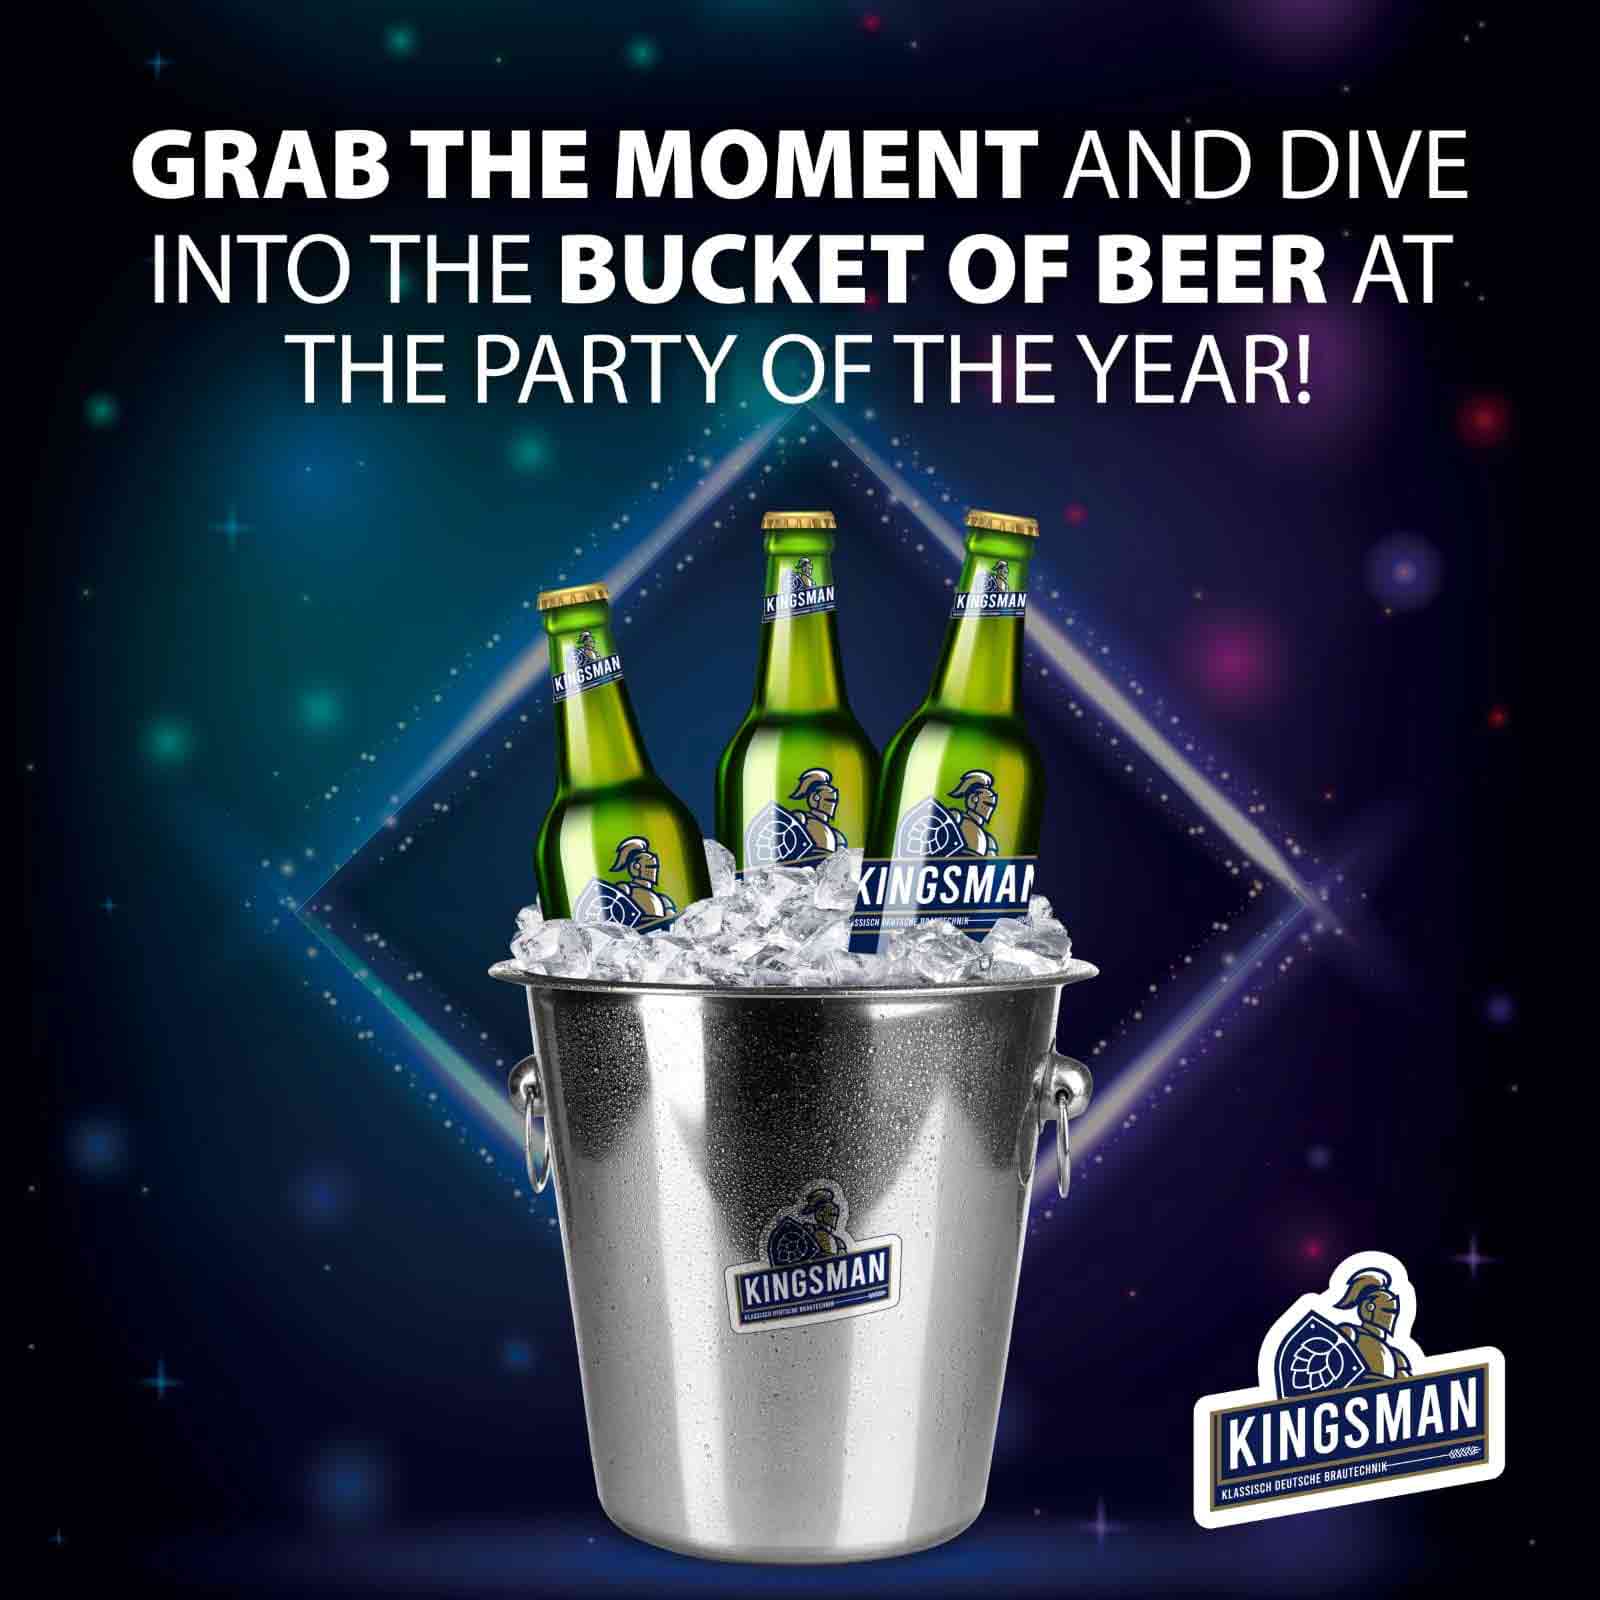 Dive into a bucket of Kingsman beer at the party of the year	